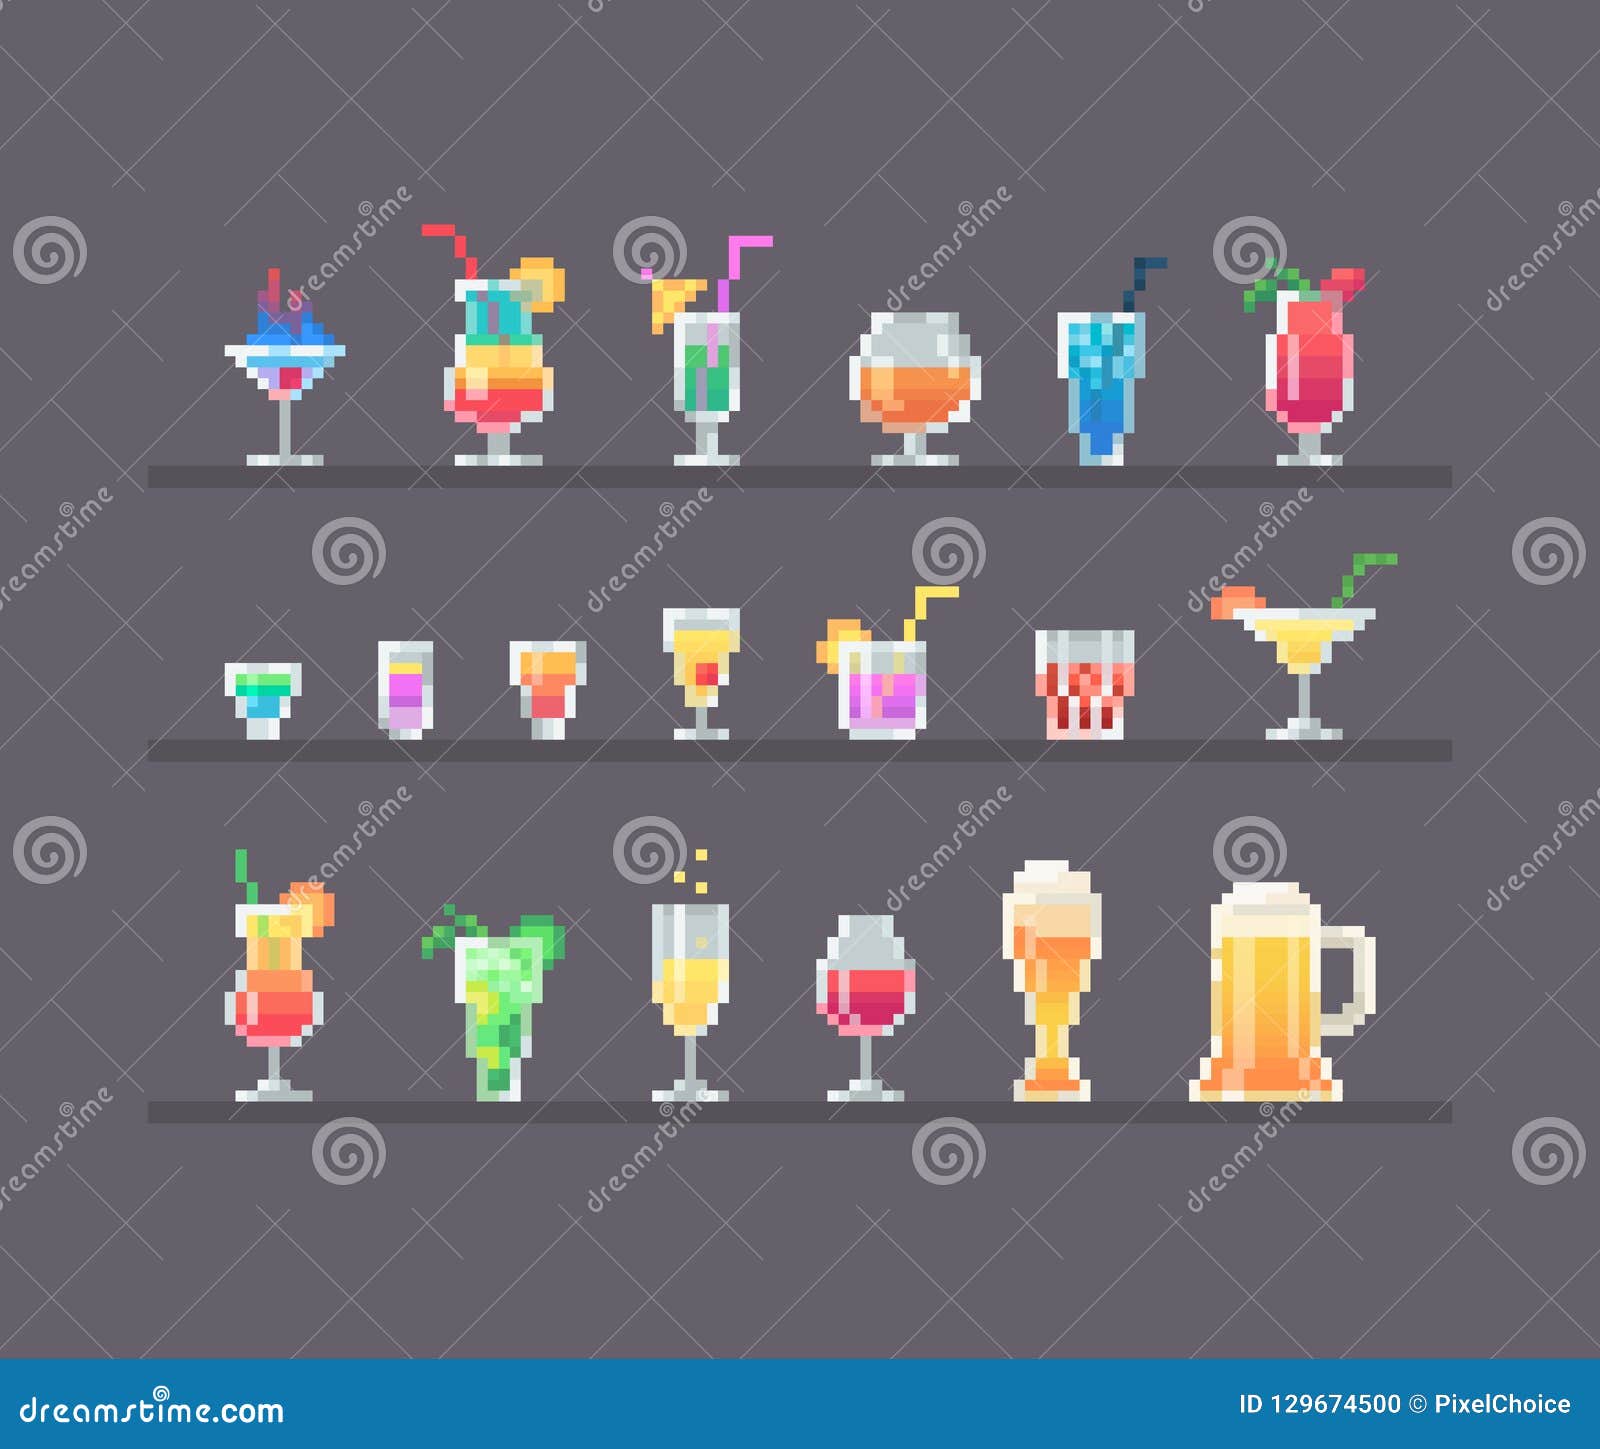 pixel art style alcohol drinks and cocktails set